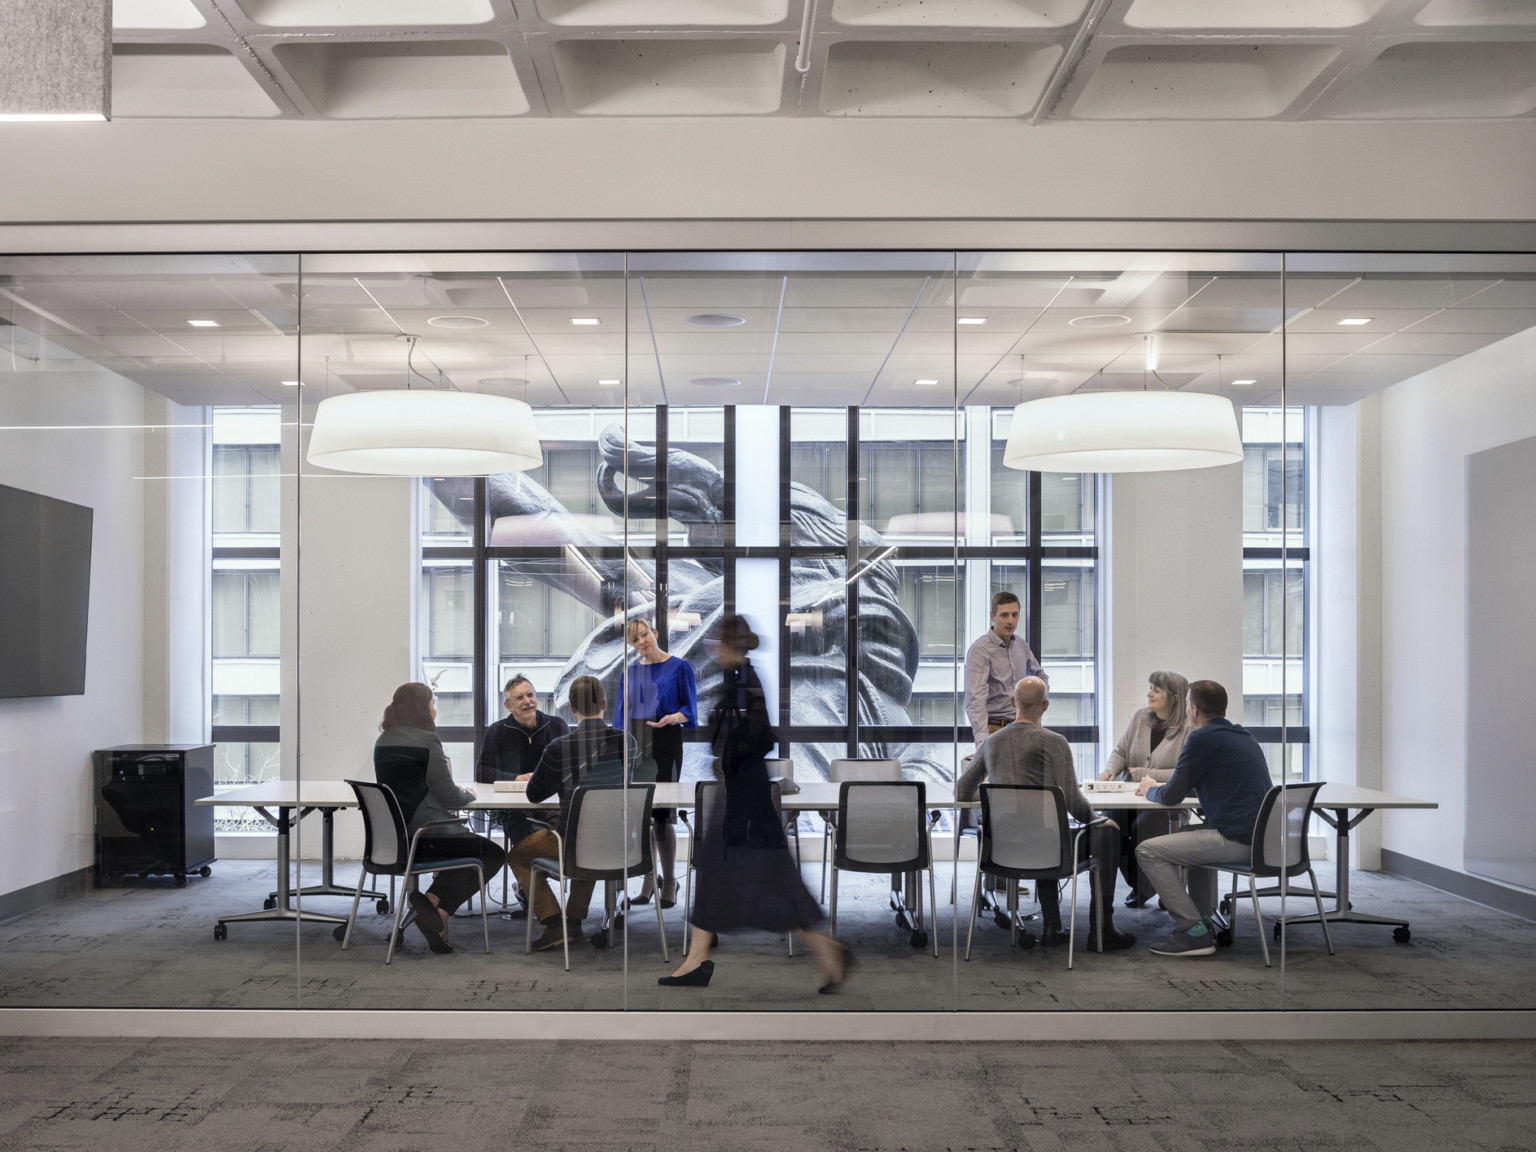 A conference room with glass wall into hallway has floor to ceiling windows looking onto the back of the Portlandia sculpture